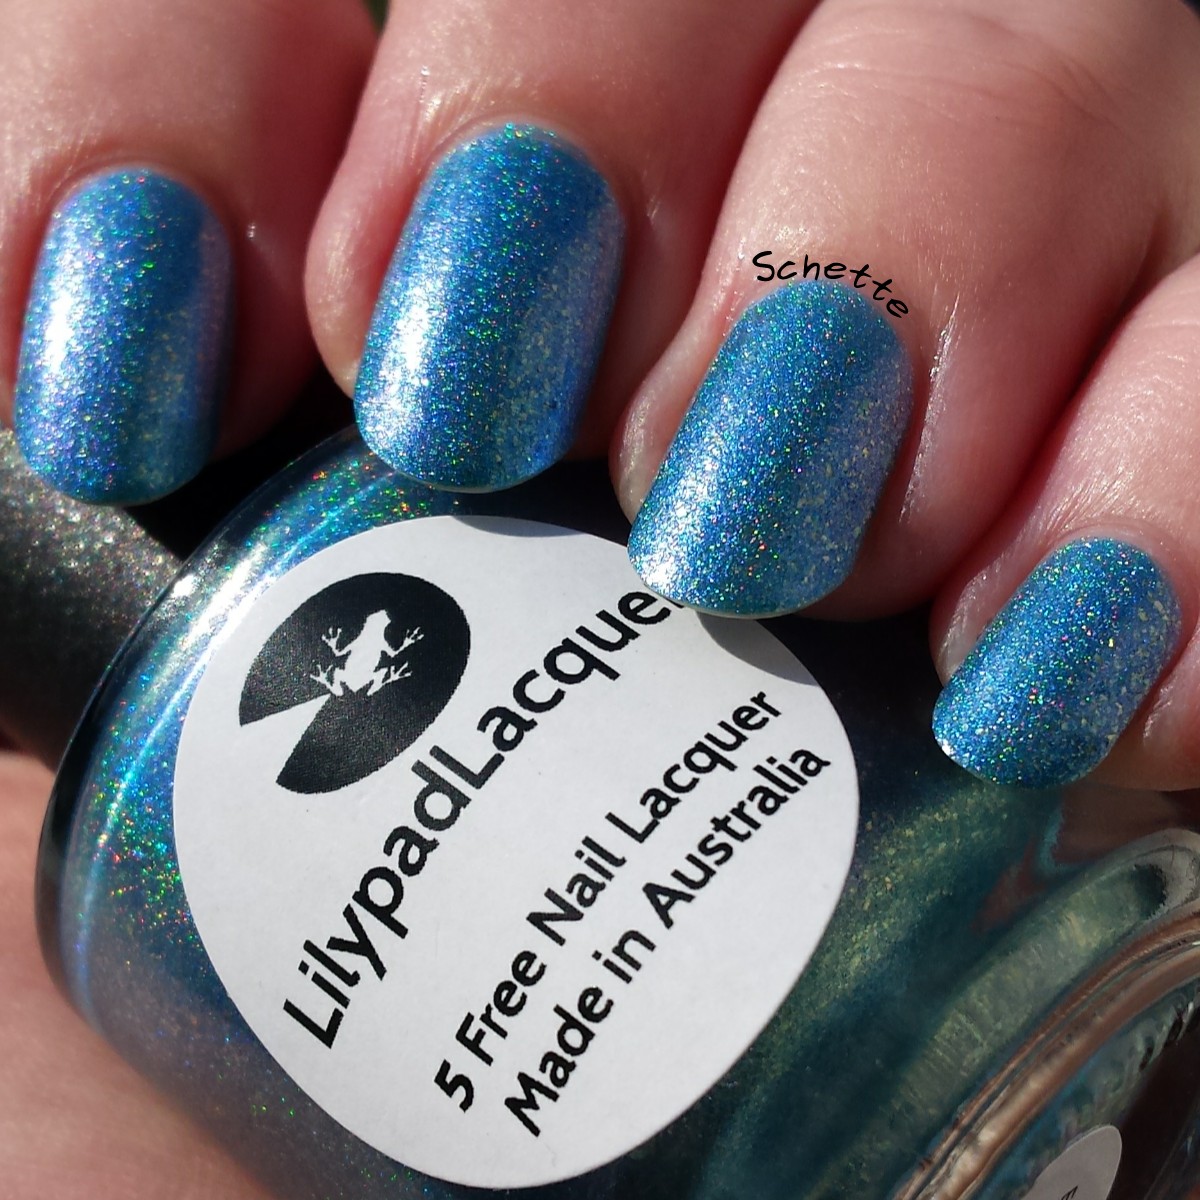 Lilypad Lacquer : With love from me to you